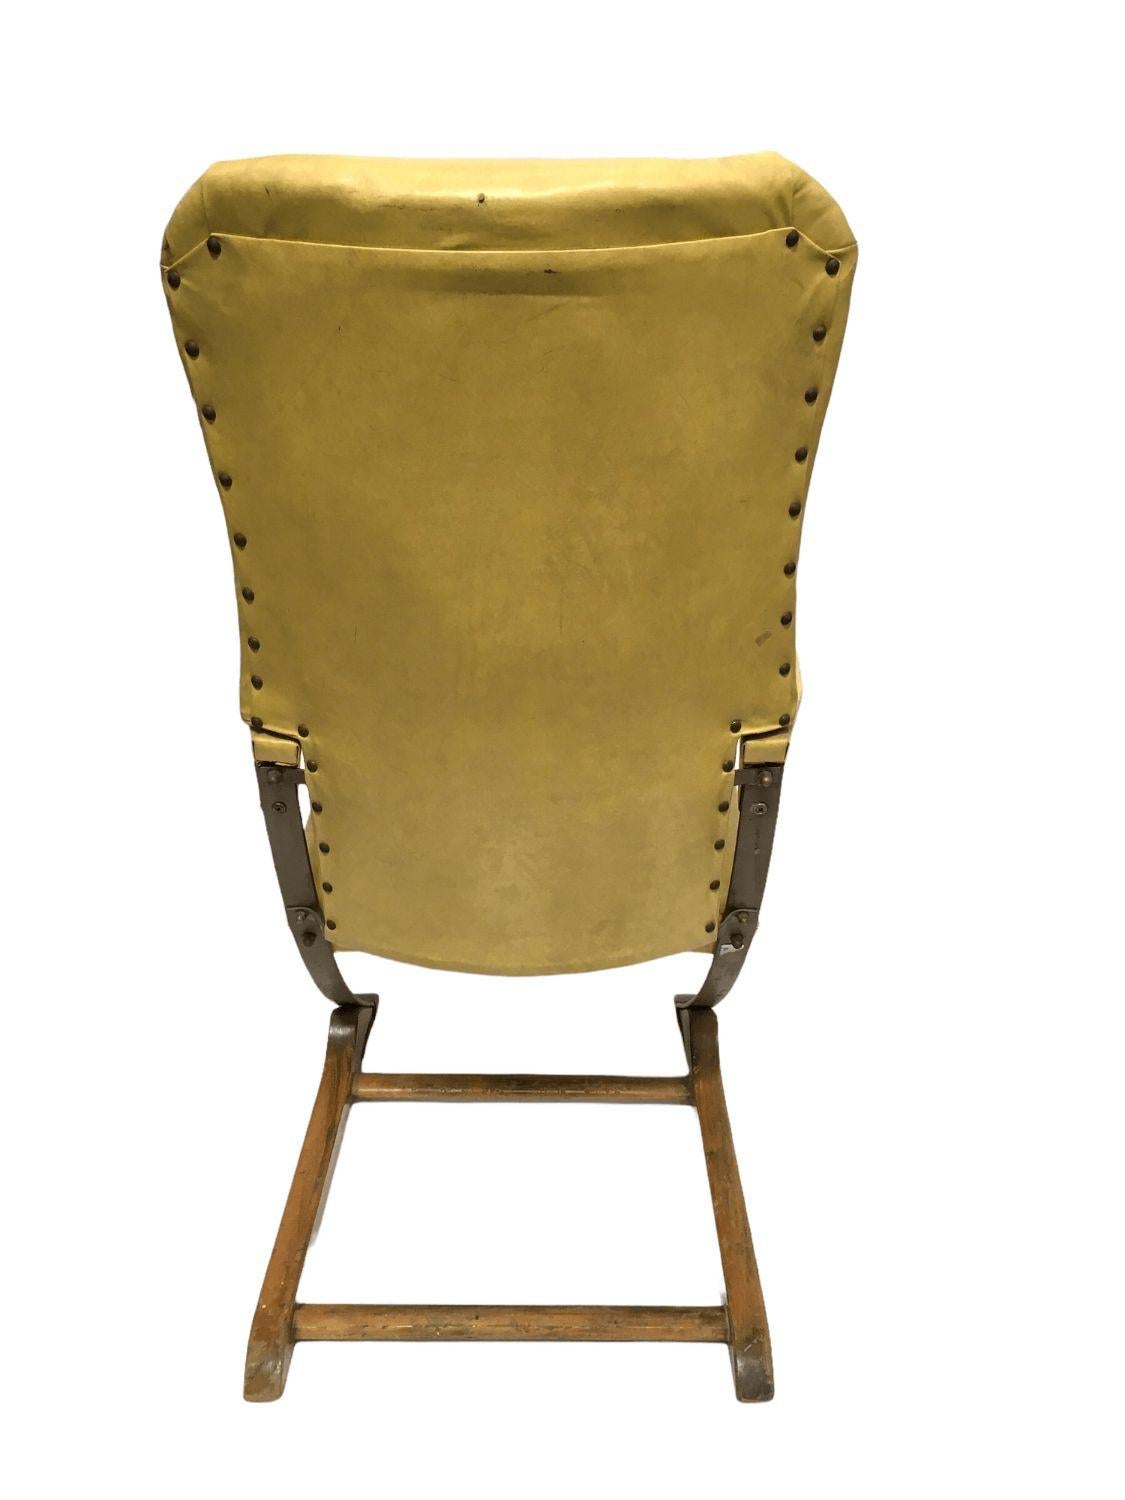 Vintage Rock-a-Chair Cantilever Rocker Chair in Harvest Gold Vinyl For Sale 1